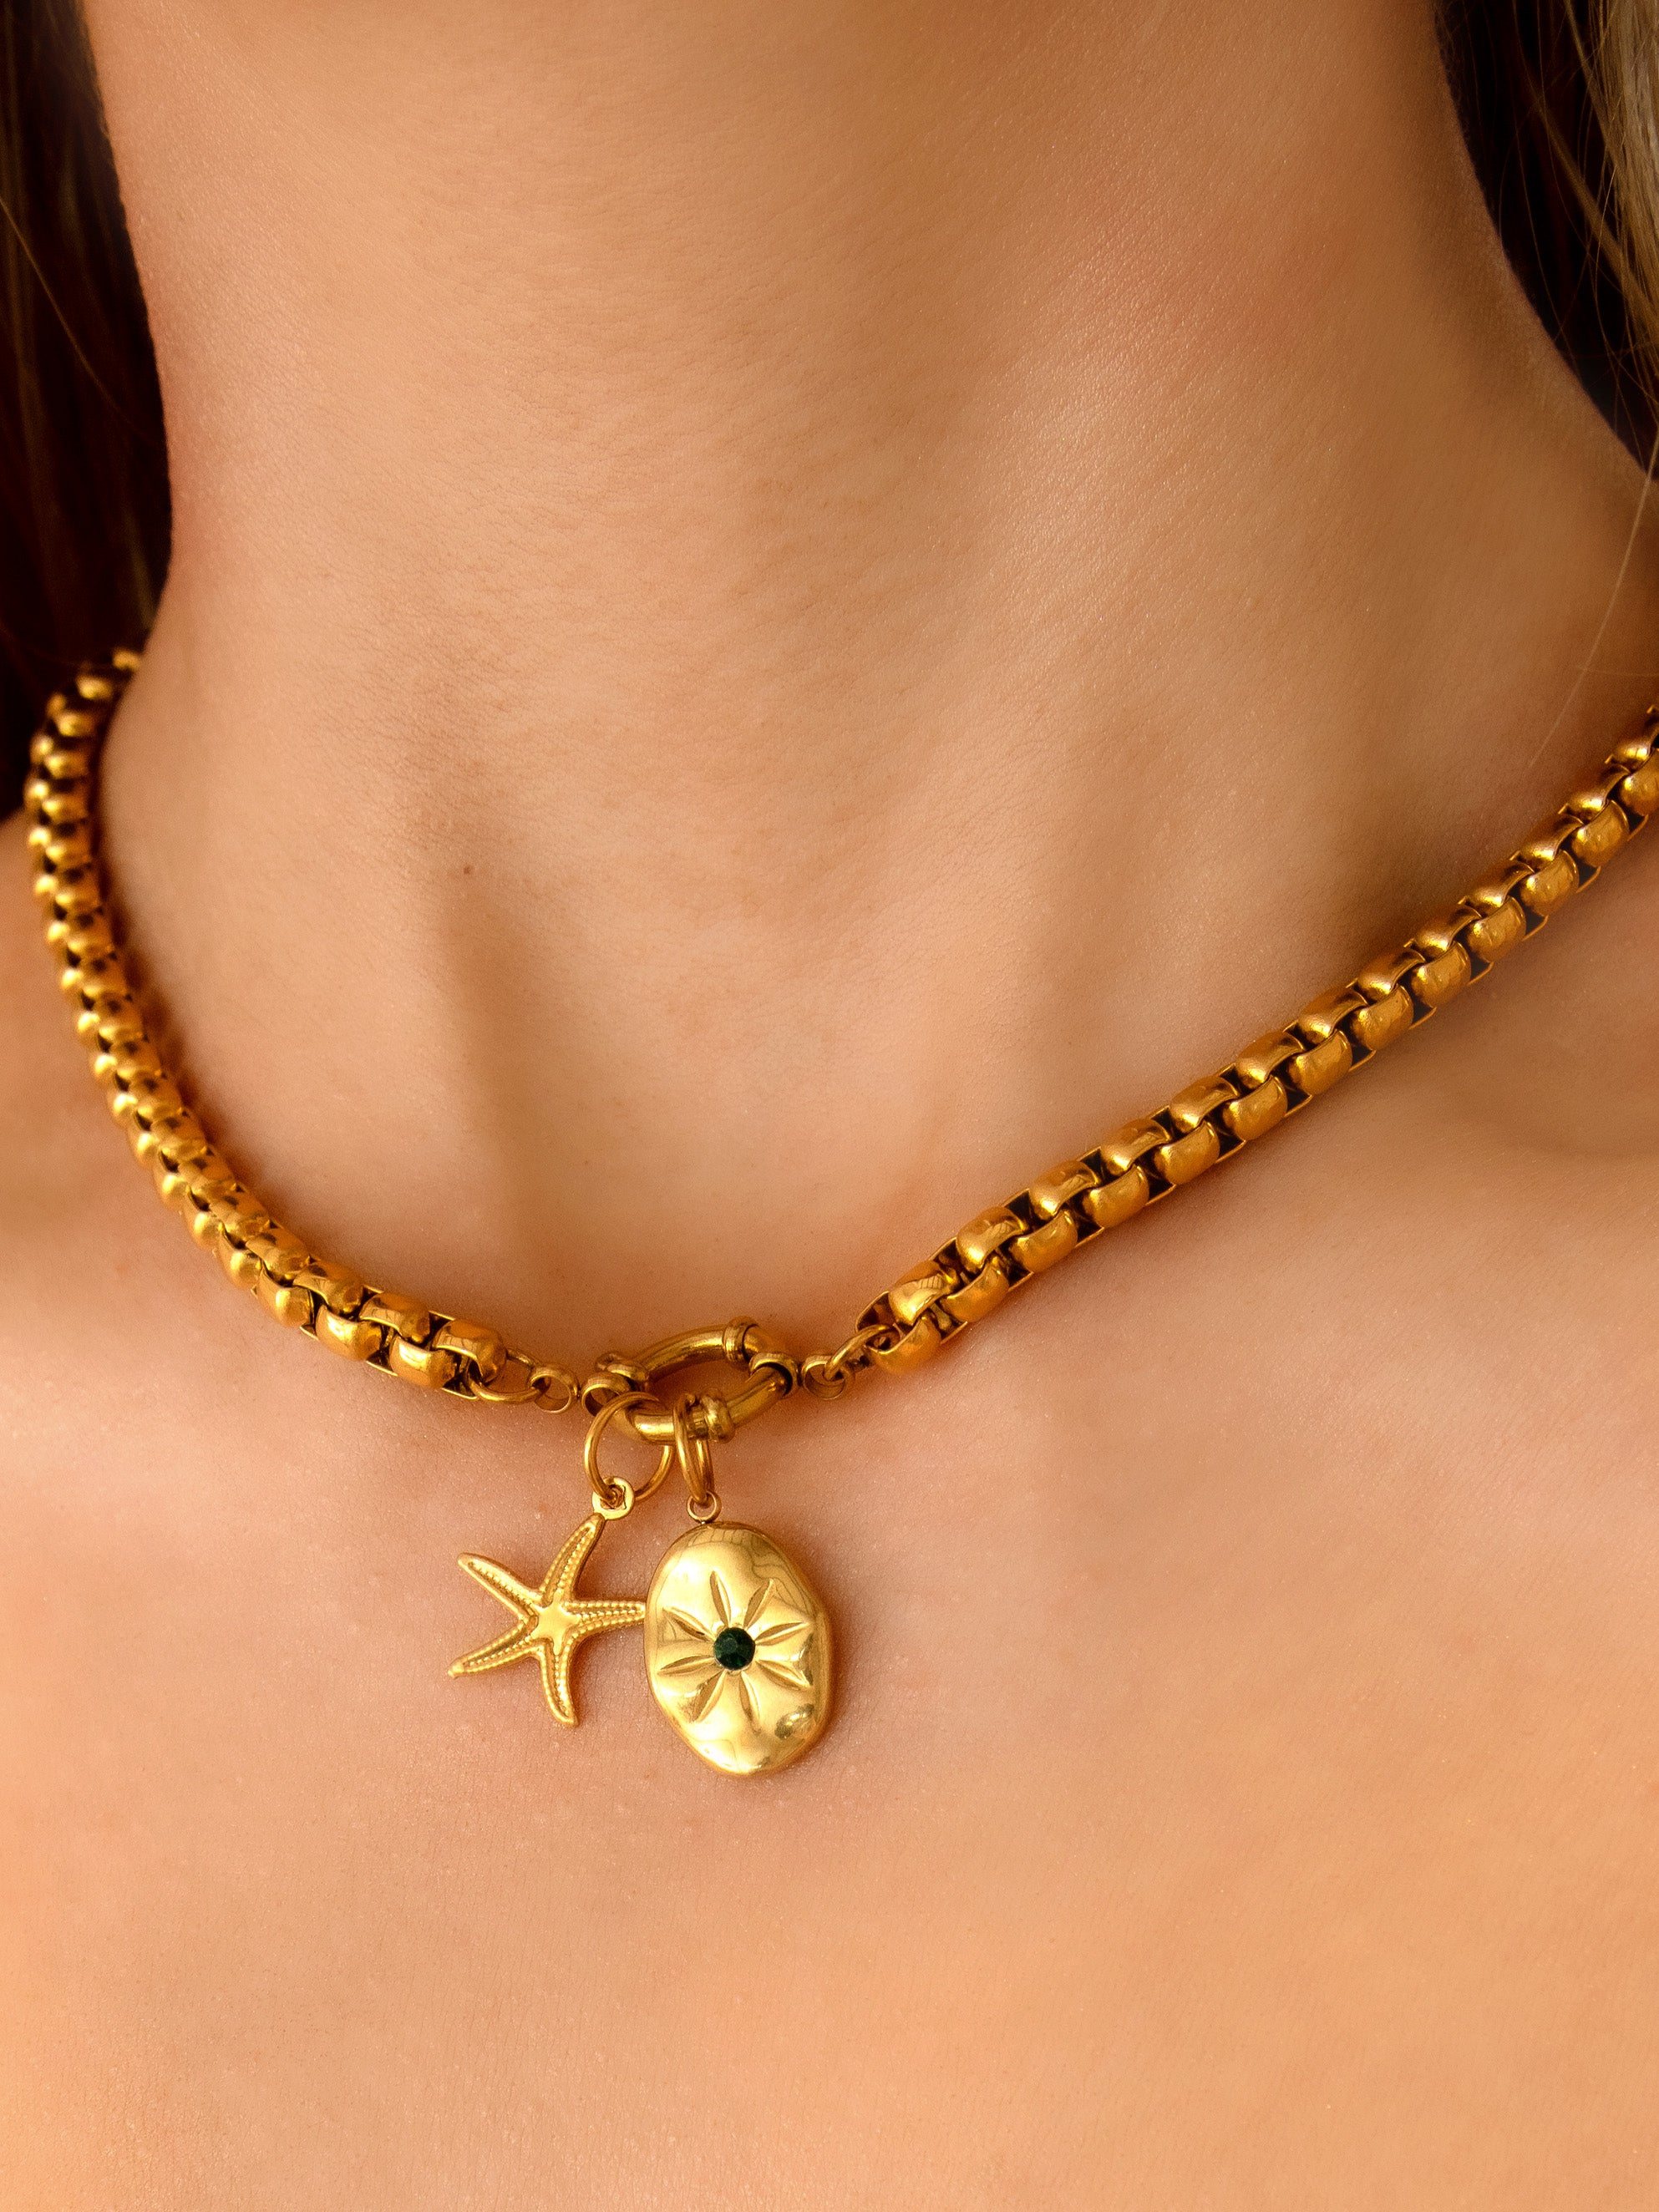 Gold Thick Belcher Chain Choker For Charms